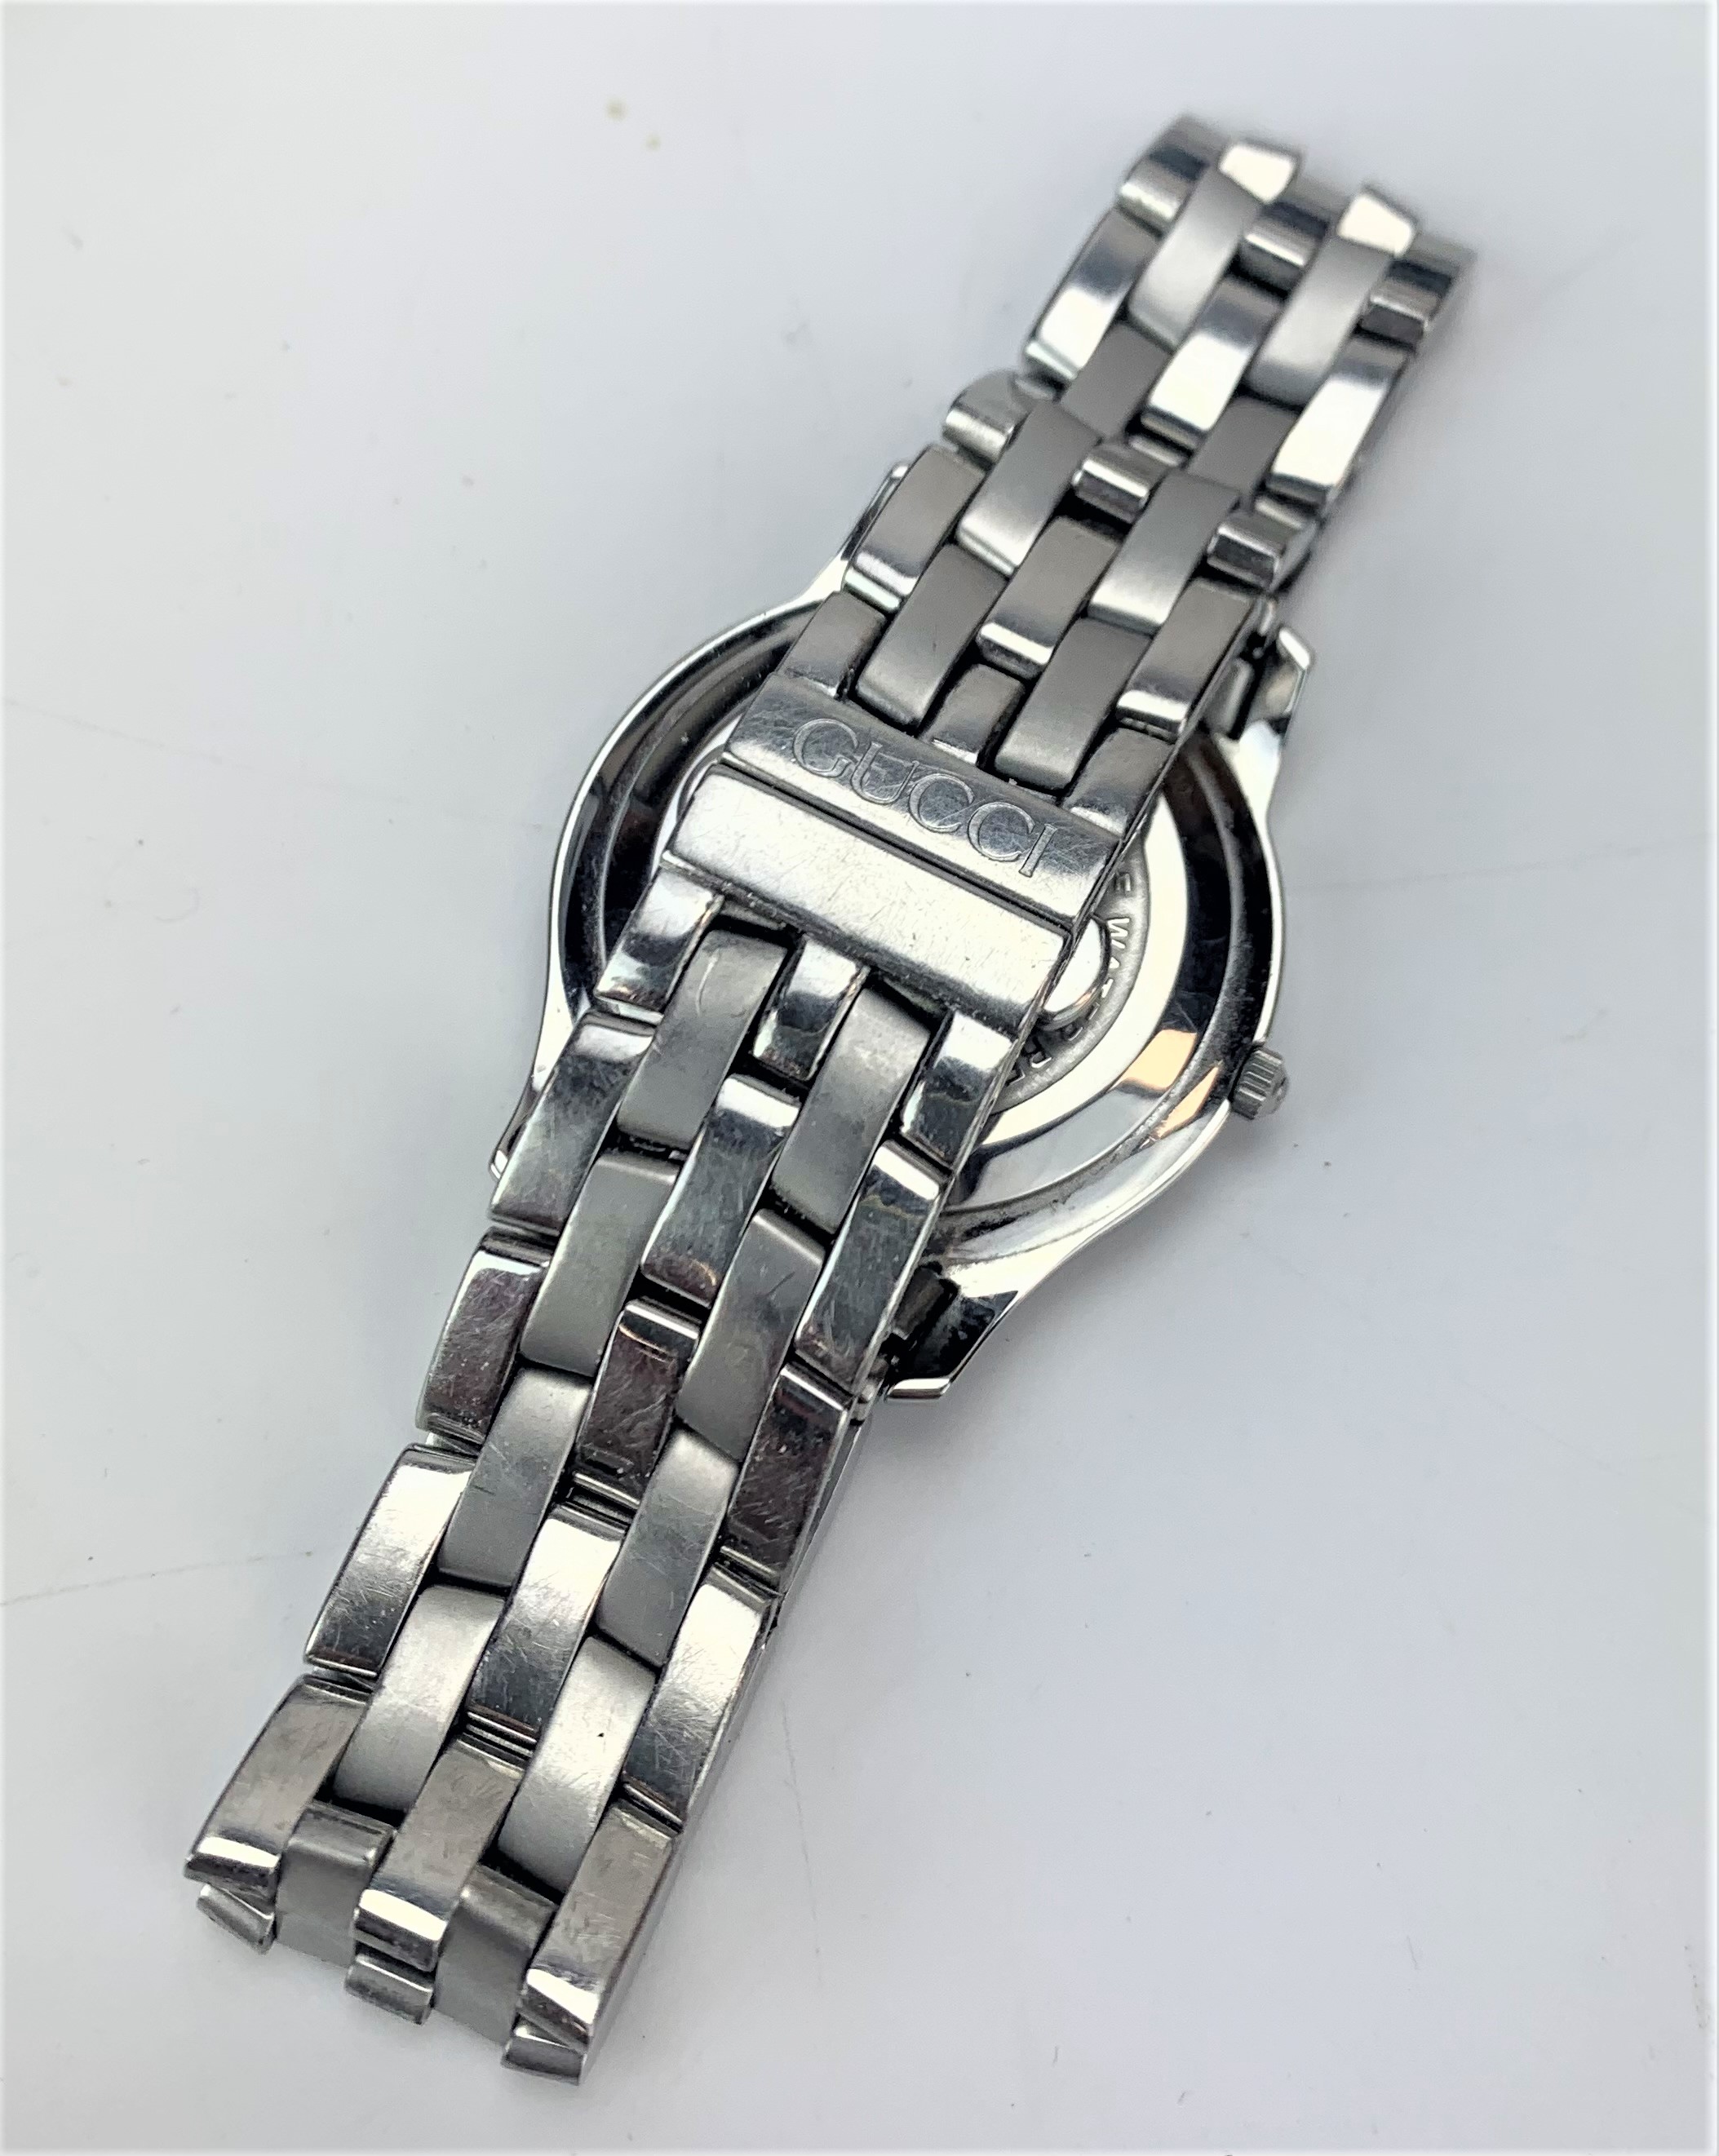 Boxed Gucci stainless steel gents watch with instructions, not running - Image 6 of 9